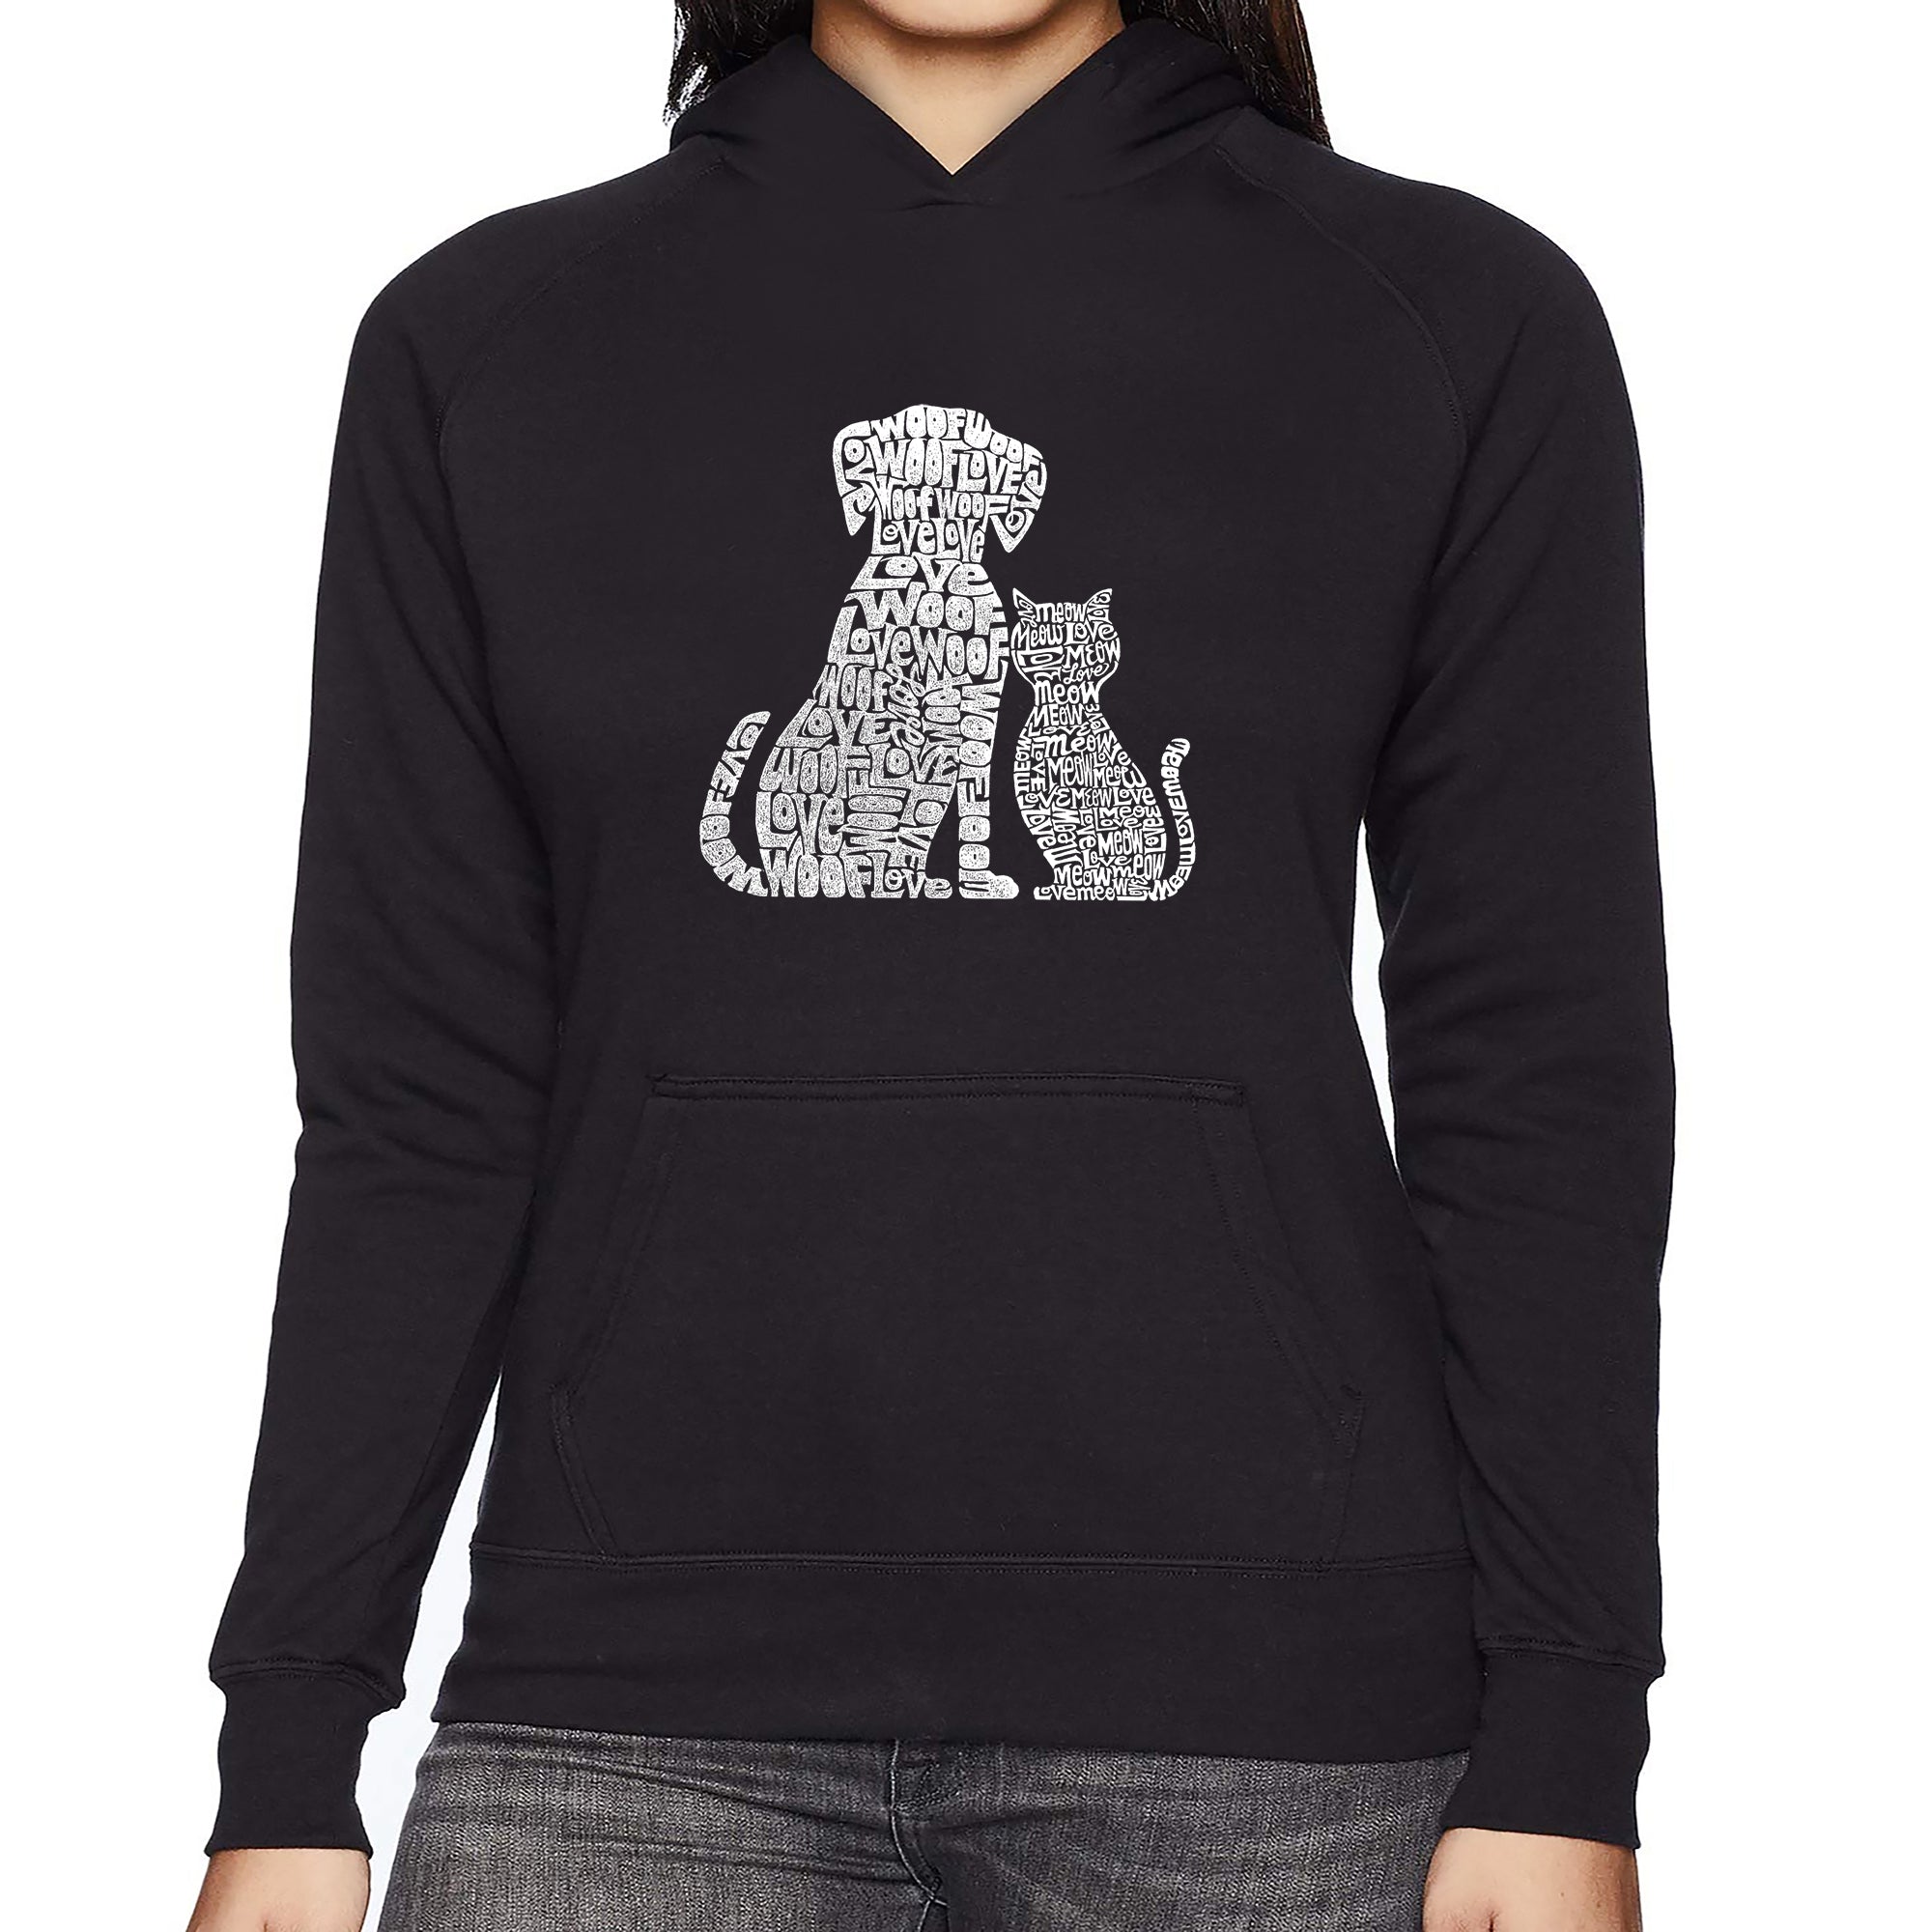 Dogs And Cats - Women's Word Art Hooded Sweatshirt - Black - Large